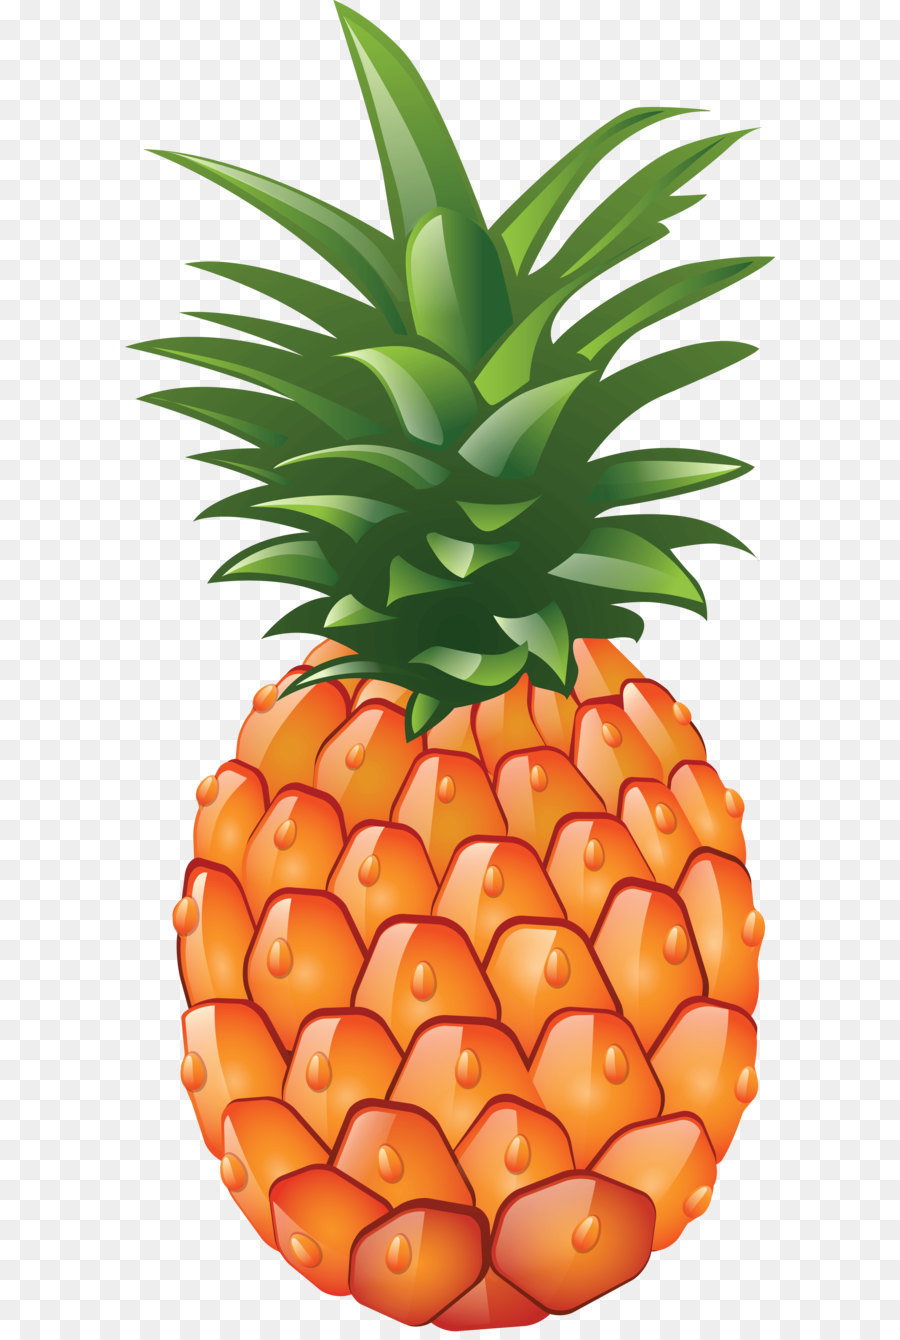 Ananas Clip art - Ananas Immagine Png Download